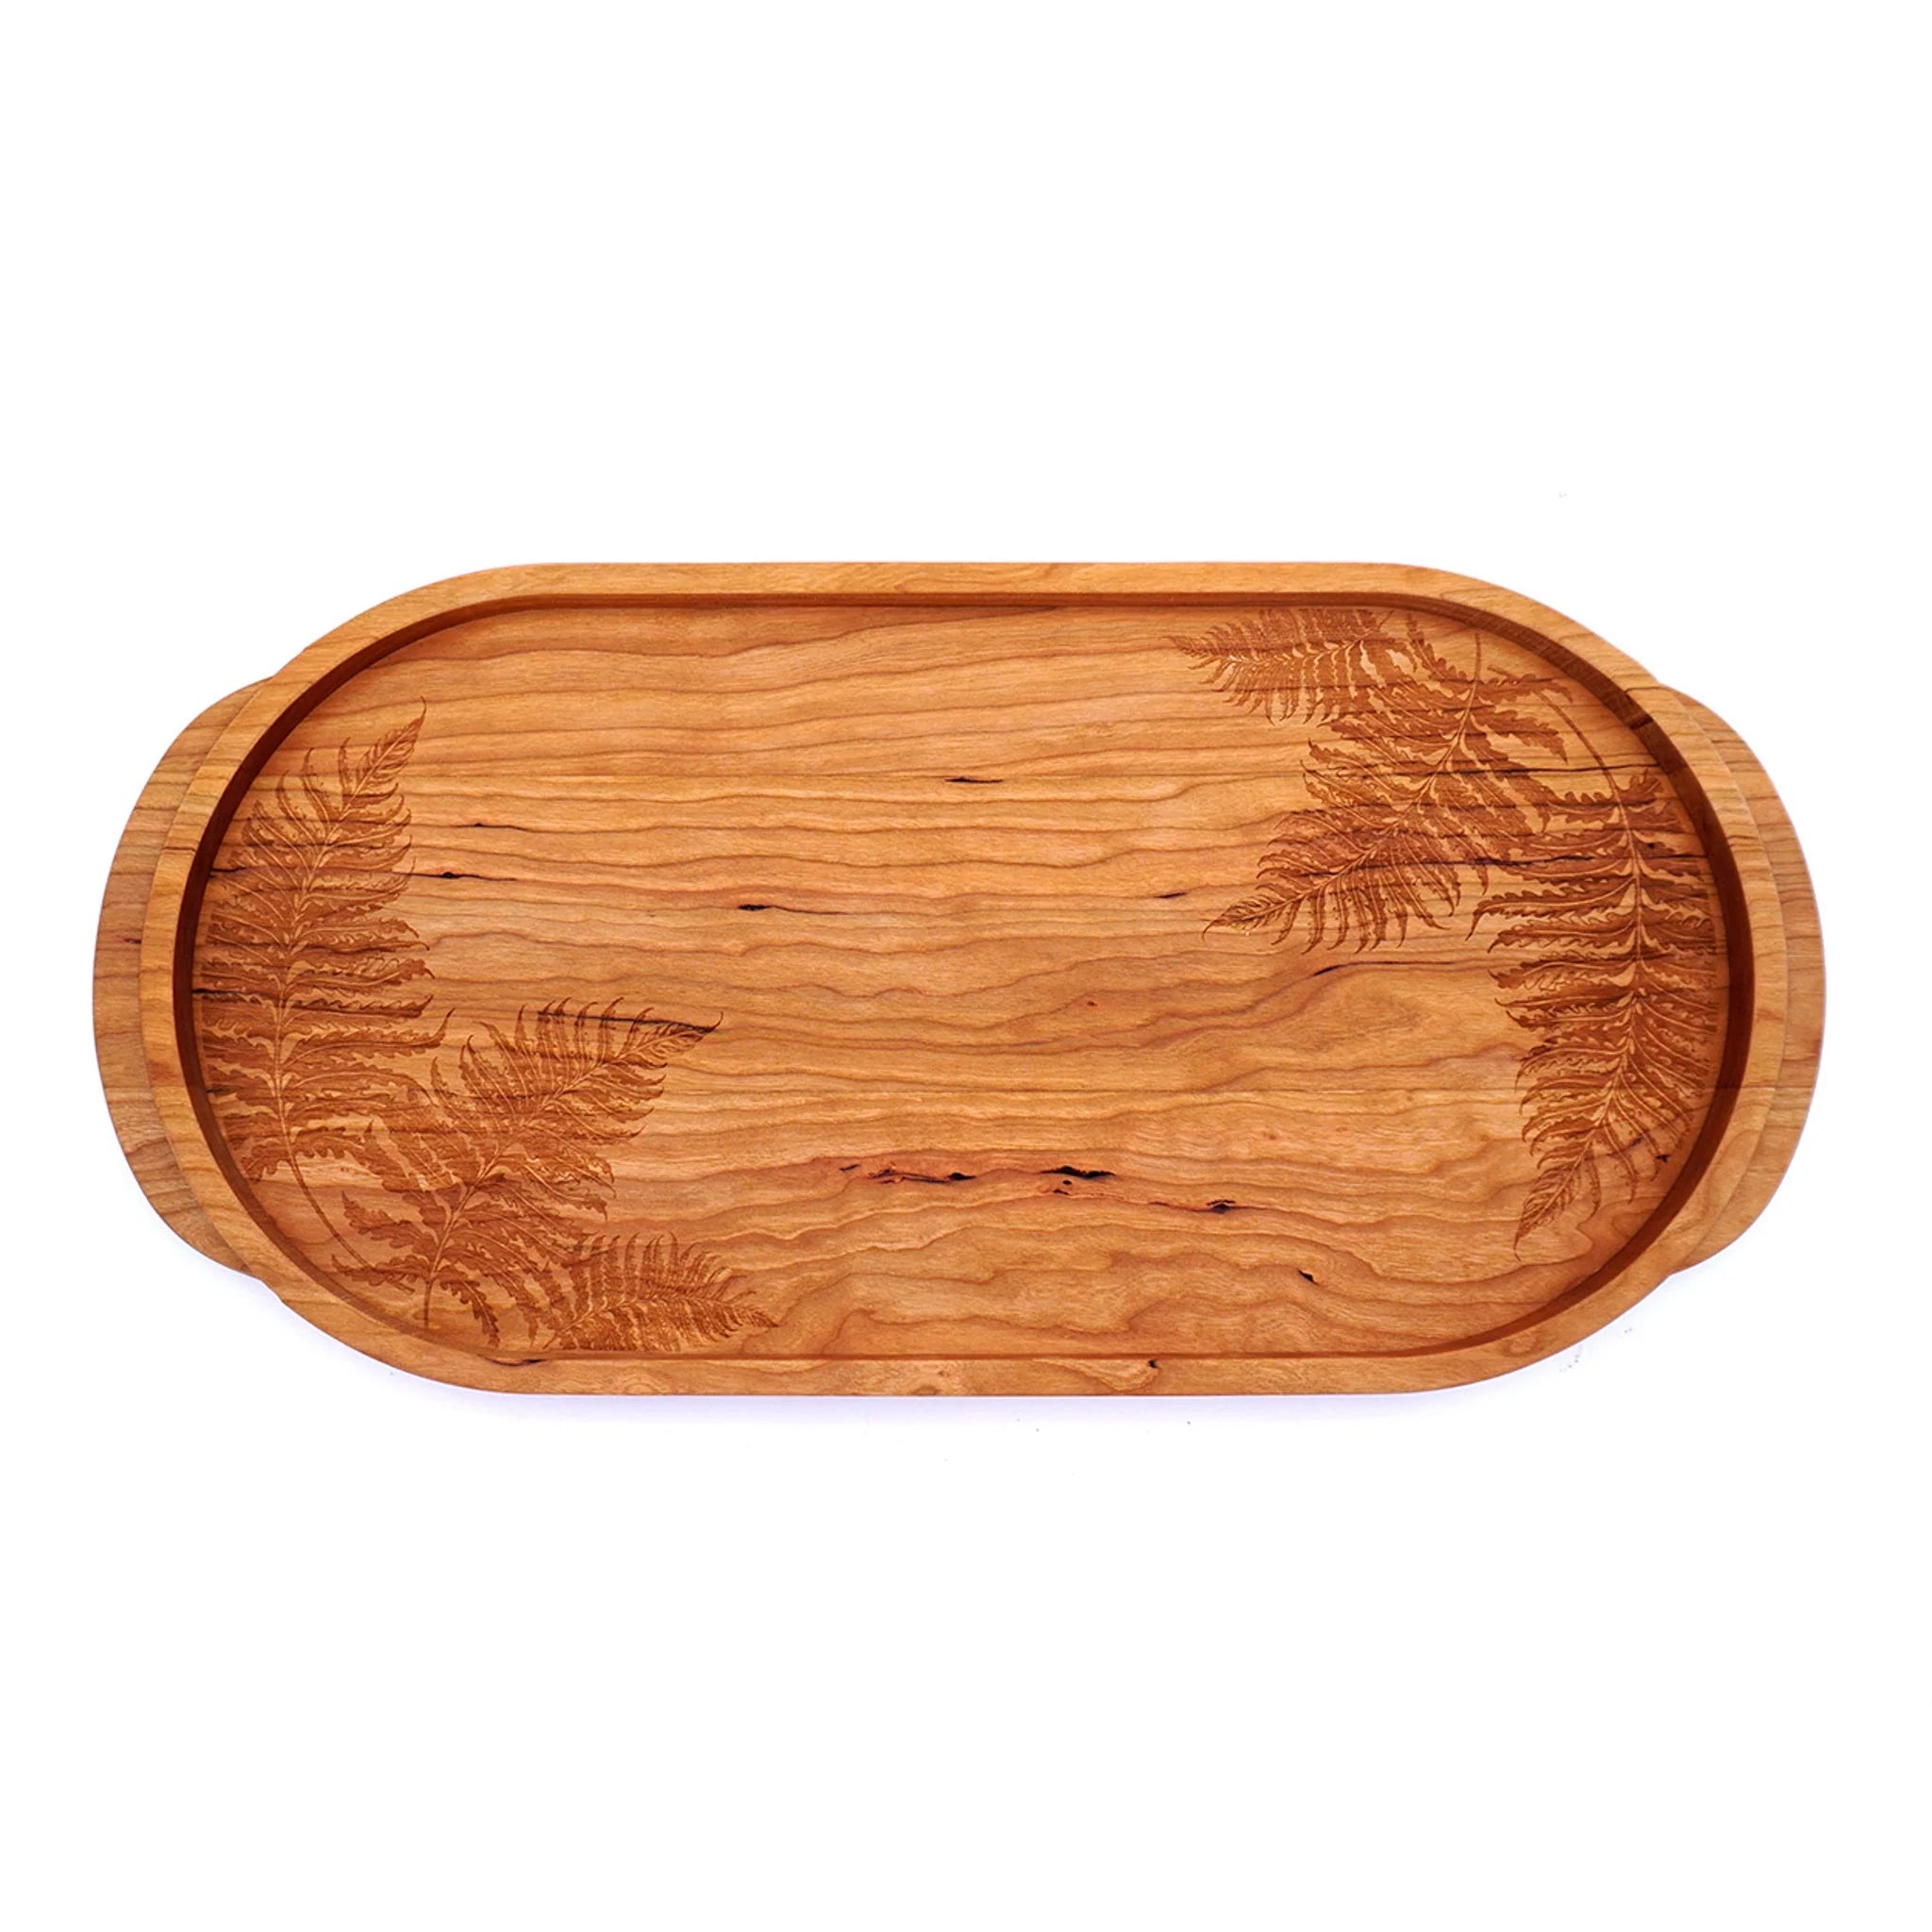 Laura Zindel Cherry Oval Wooden Serving Tray, Multiple Designs